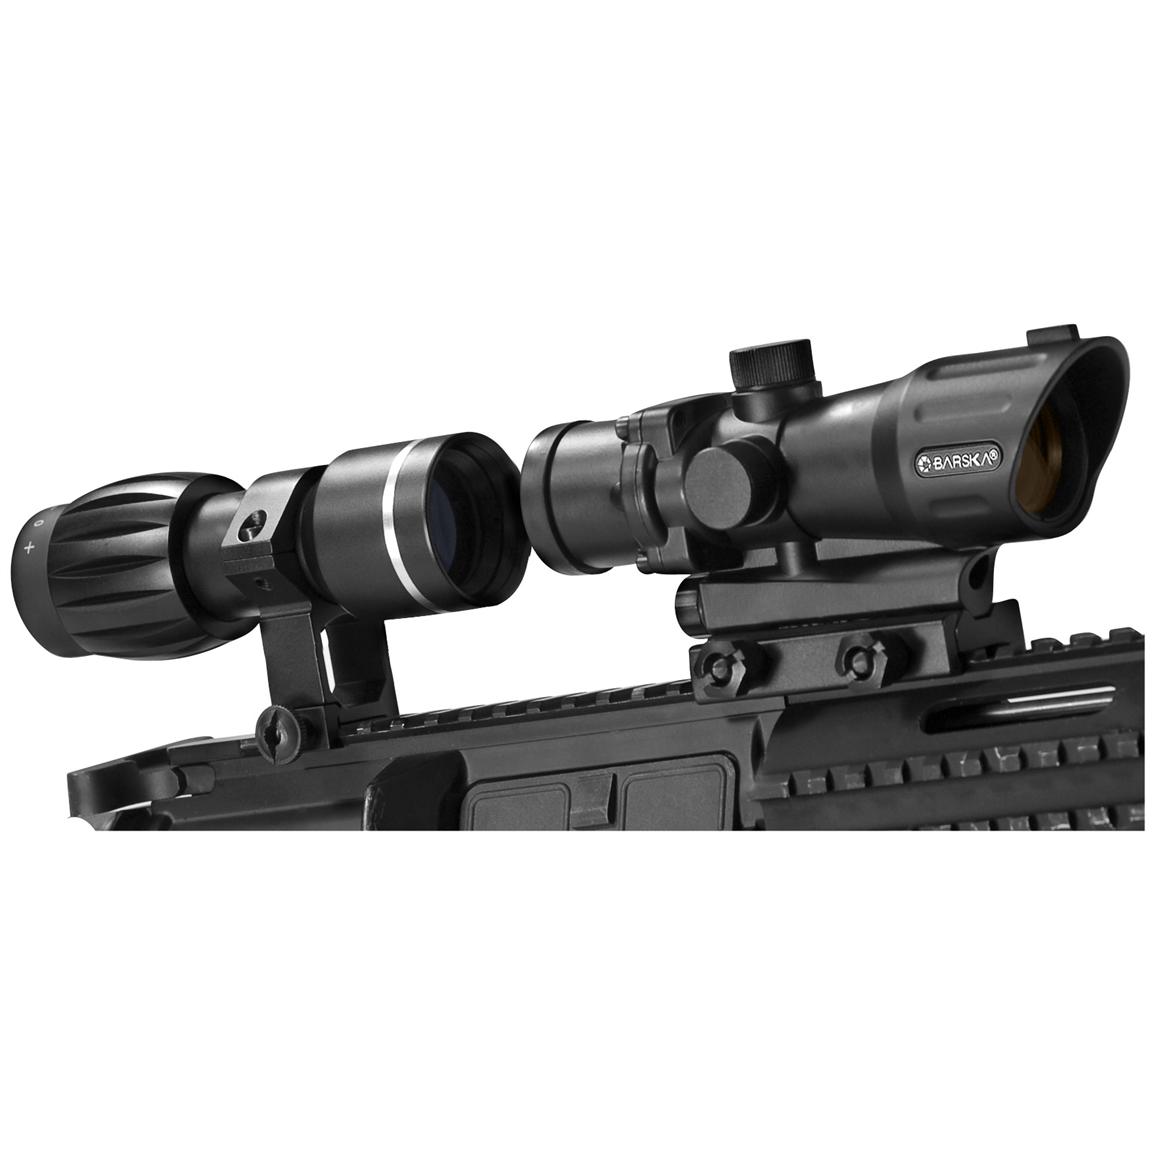 Barska® 4x20 Mm M 16 Ar 15 Electro Sight With 3x Magnifier